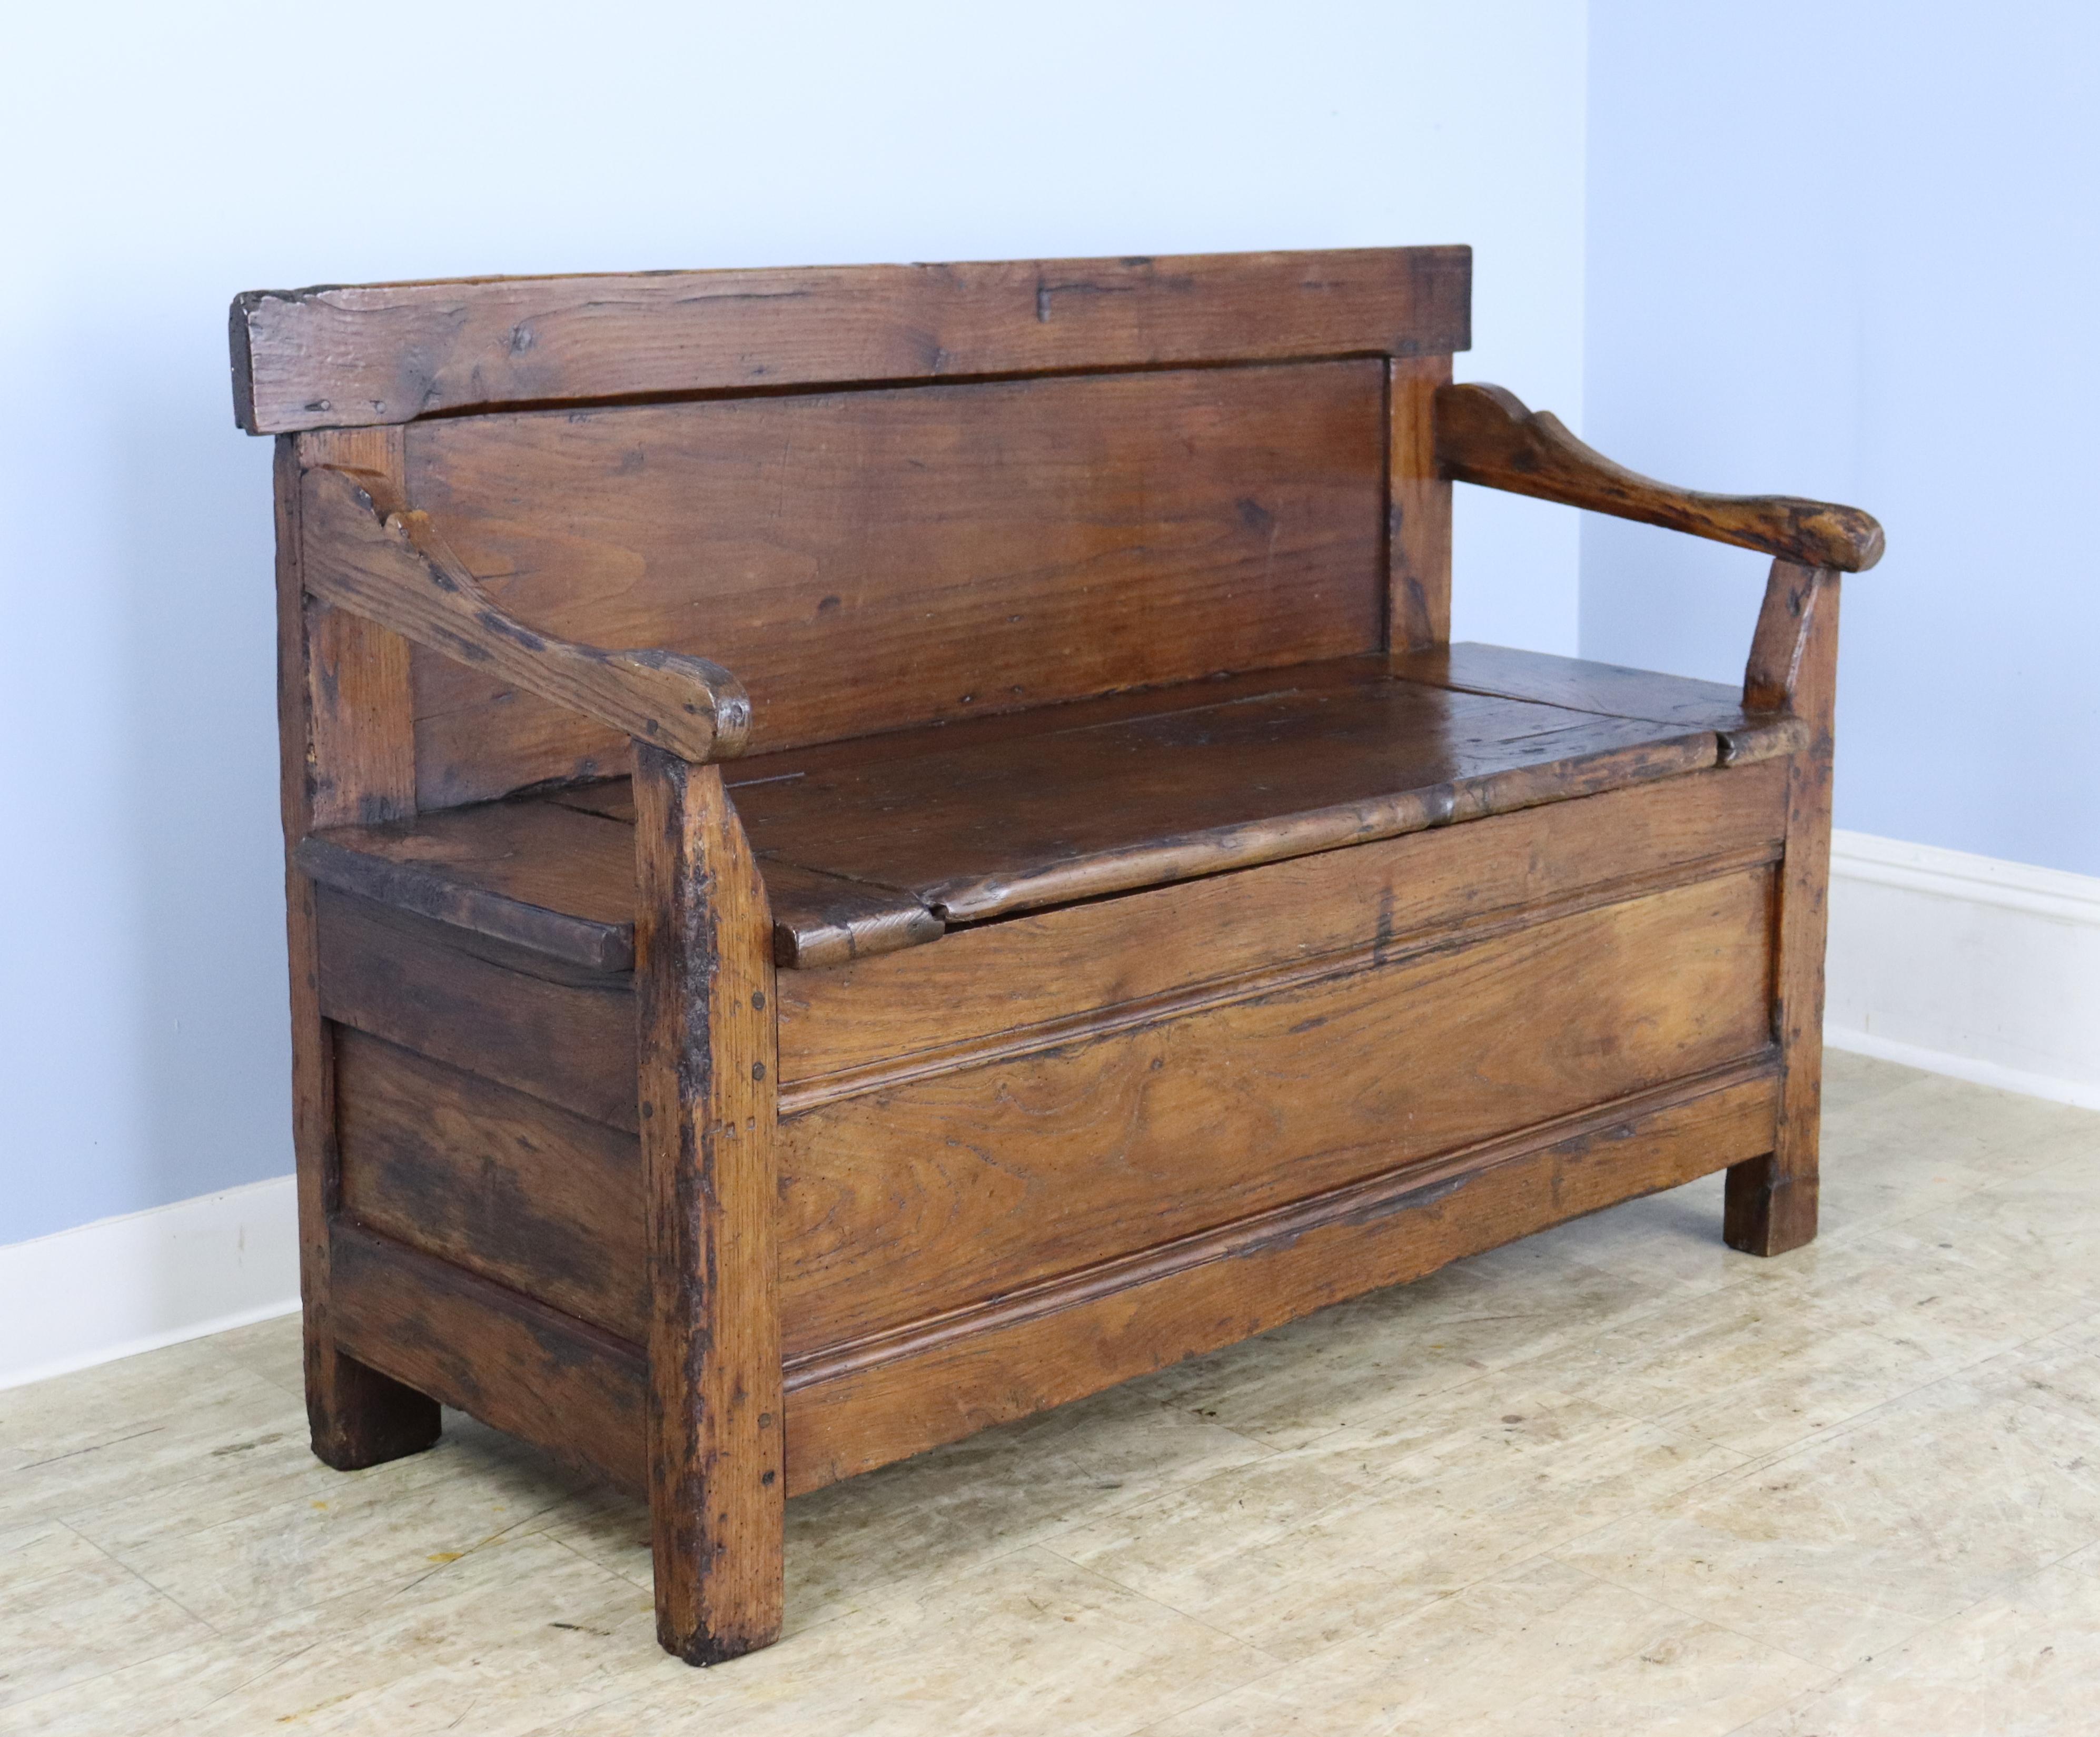 A handsome chunky chestnut bench with lots of good wear and a hinged flip up seat with good storage.  The interior of the storage compartment is quite clean.